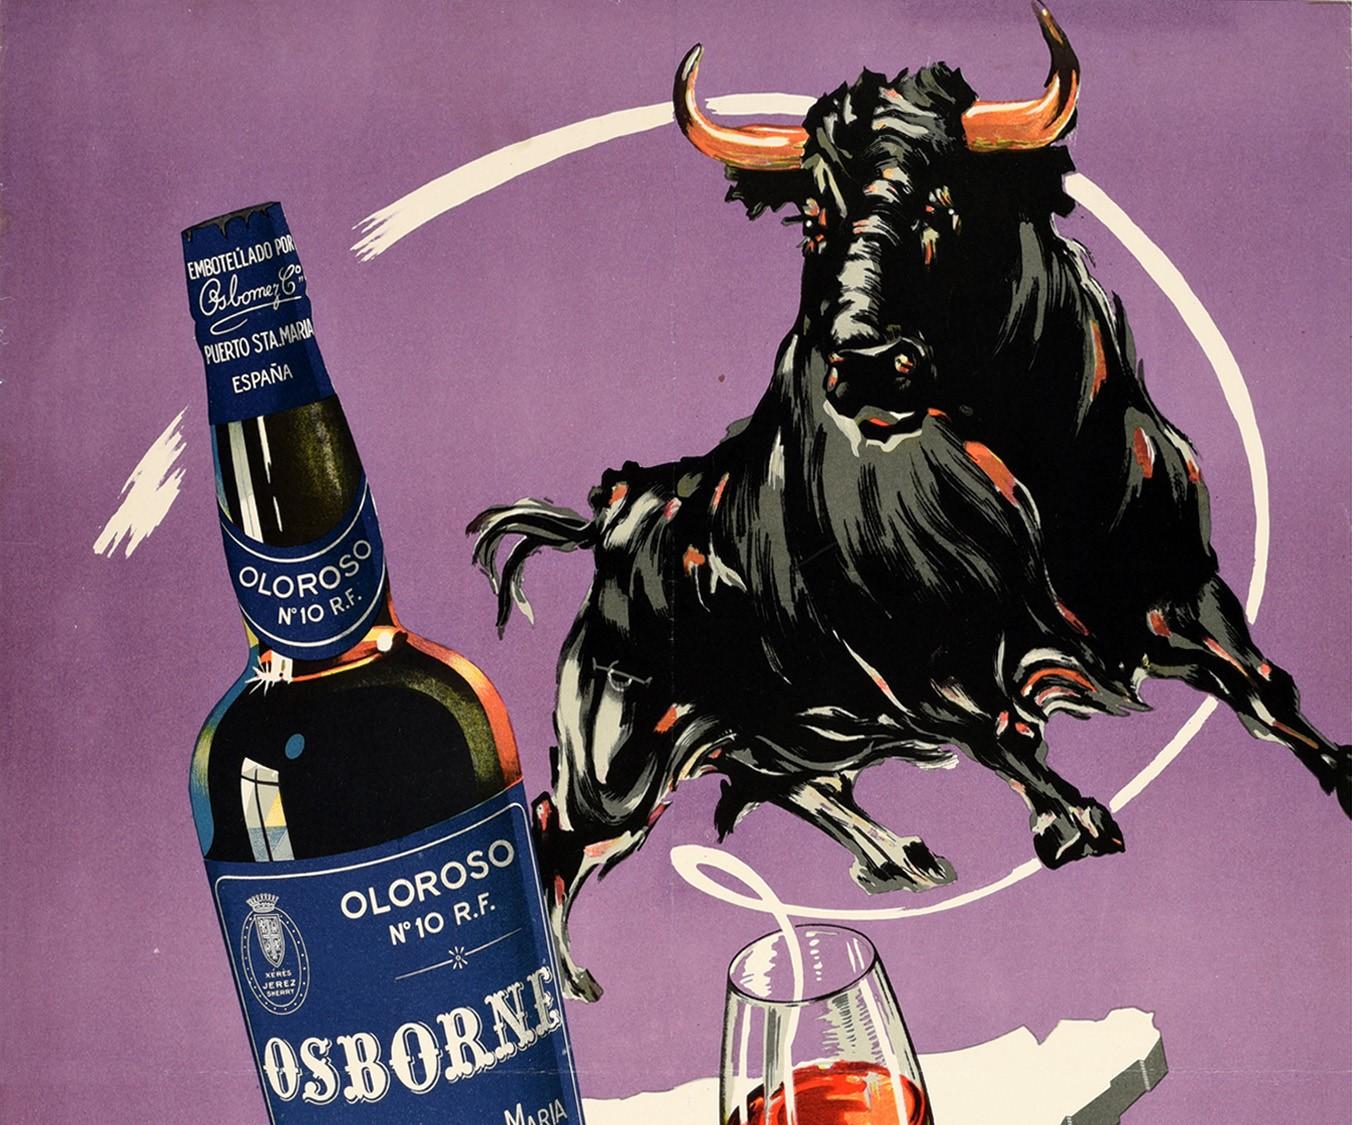 Original vintage drink advertising poster for Oloroso No.10 R.F. Osborne Sherry / Xeres / Jerez Puerto de Santa Maria Espana featuring a great design depicting a bull above a bottle of the sherry wine made from palomino grapes next to a glass on an